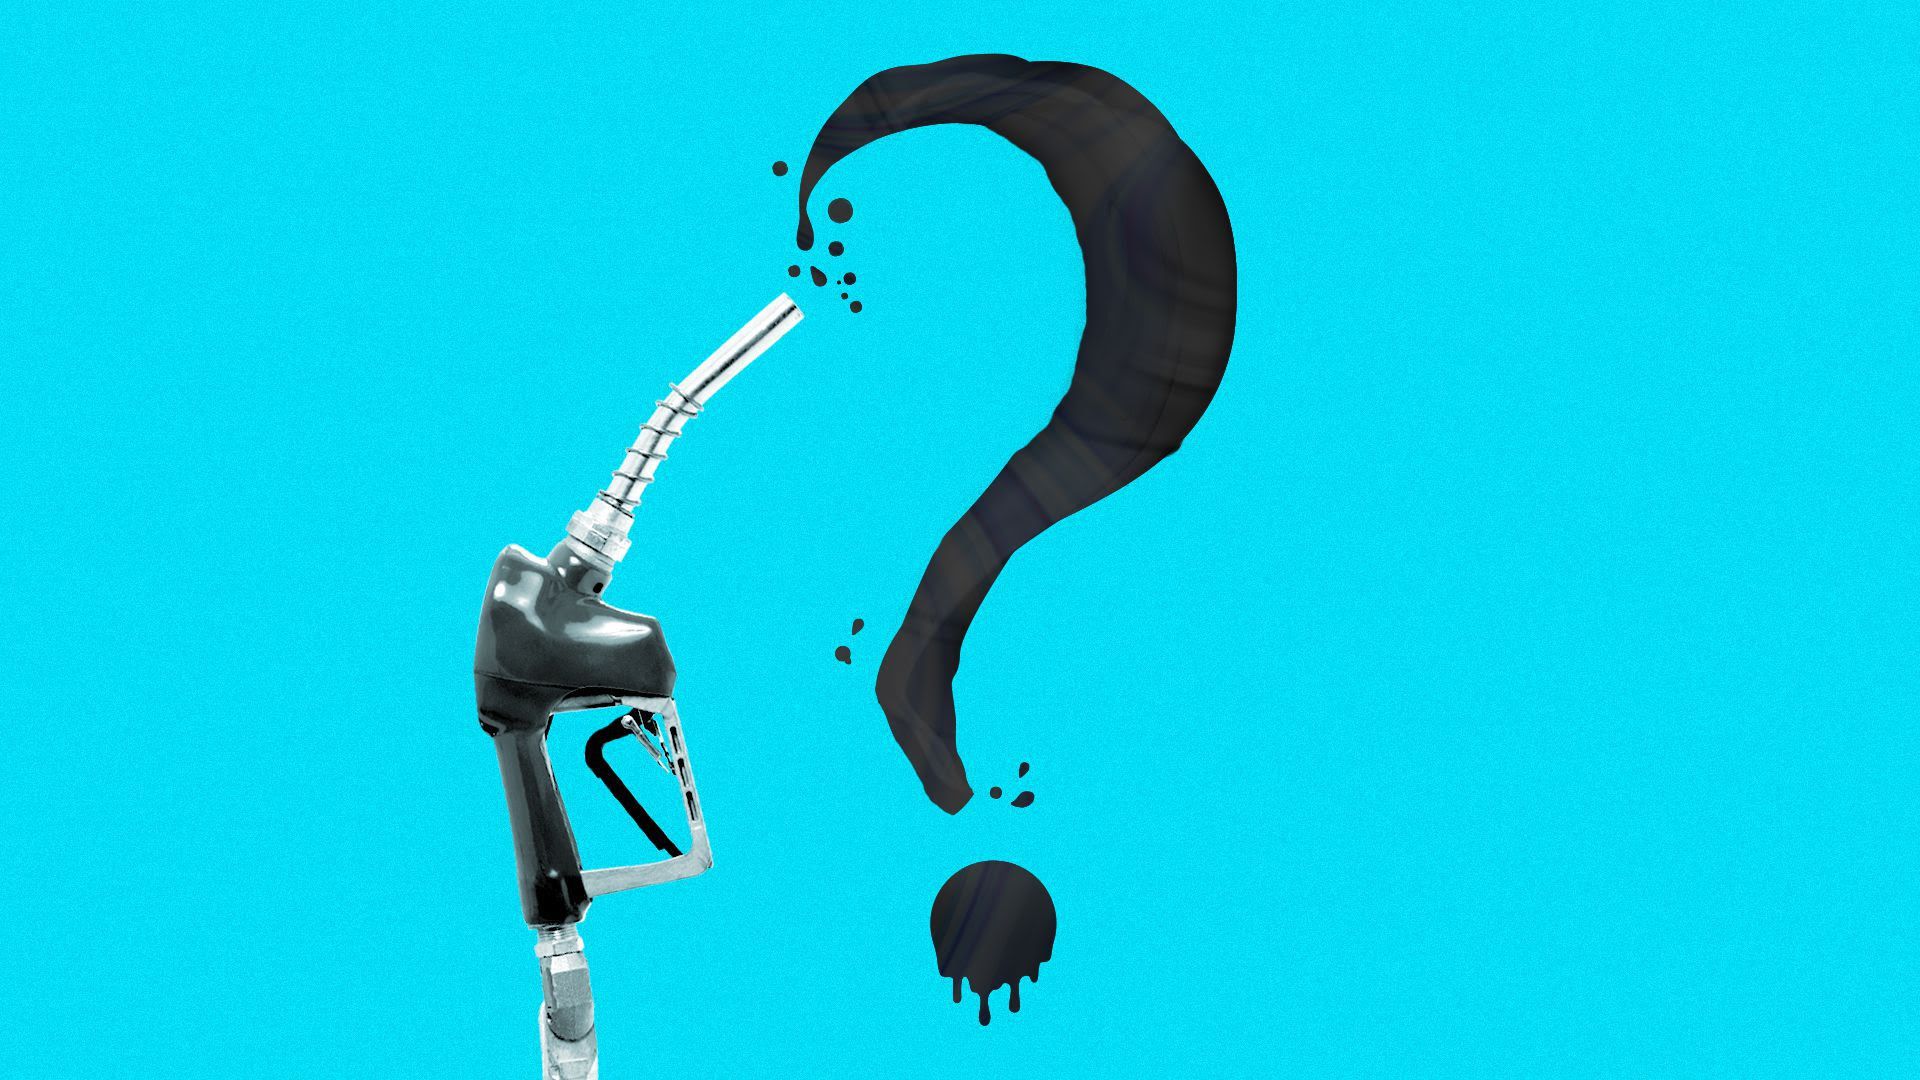 Illustration of oil spewing out from a pump in the shape of a question mark